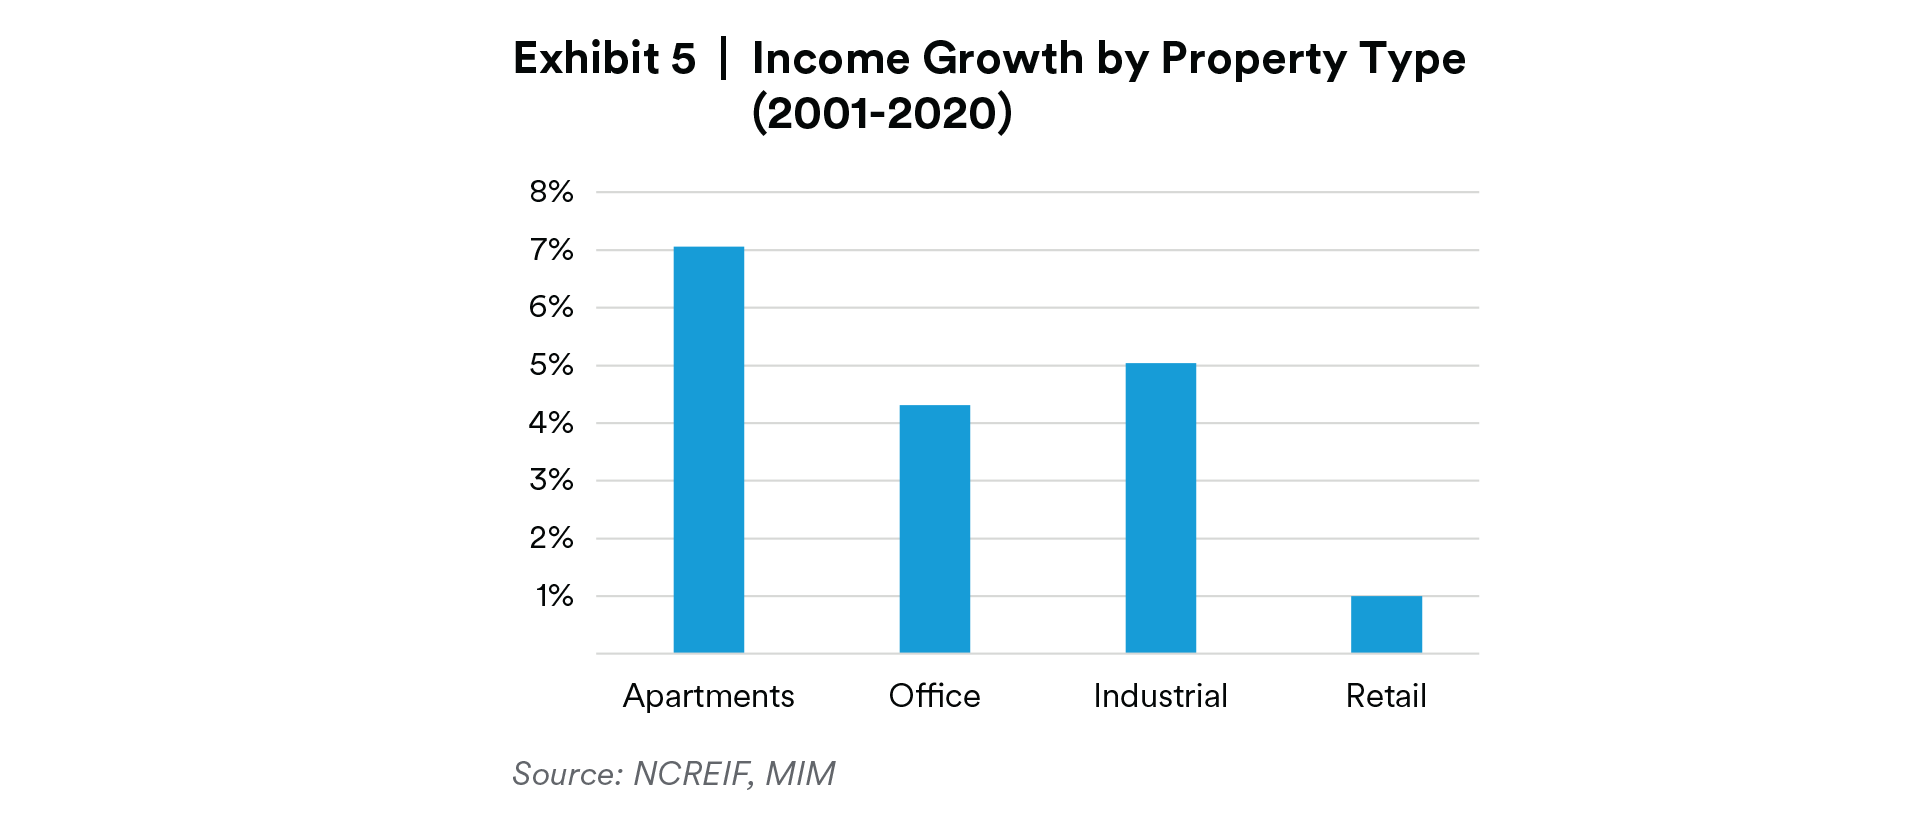 /></figure>
<!-- /wp:image -->

<!-- wp:paragraph -->
<p>Furthermore, even within the individual property types, performance can also vary greatly. The U.S. economy is highly decentralized relative to other developed markets, and the nation’s tradition of local control results in a lack of consistency between zoning and land use laws at the metro level. With each metropolitan area driven by different industries and demographic drivers, real estate demand growth can vary substantially, as can the development community’s ability to respond to that demand with new construction.</p>
<!-- /wp:paragraph -->

<!-- wp:paragraph -->
<p>The result is that there is often a low correlation between the income growth of commercial real estate assets across markets with different economic drivers. For example, over the past 20 years, there have been low correlations between apartment markets, depending on the economic drivers of each market. (See Exhibit 6). We chose apartments for this example because the returns in this property type have been the most stable over time and thus less subject to distortions in correlation factors.</p>
<!-- /wp:paragraph -->

<!-- wp:image -->
<figure class=